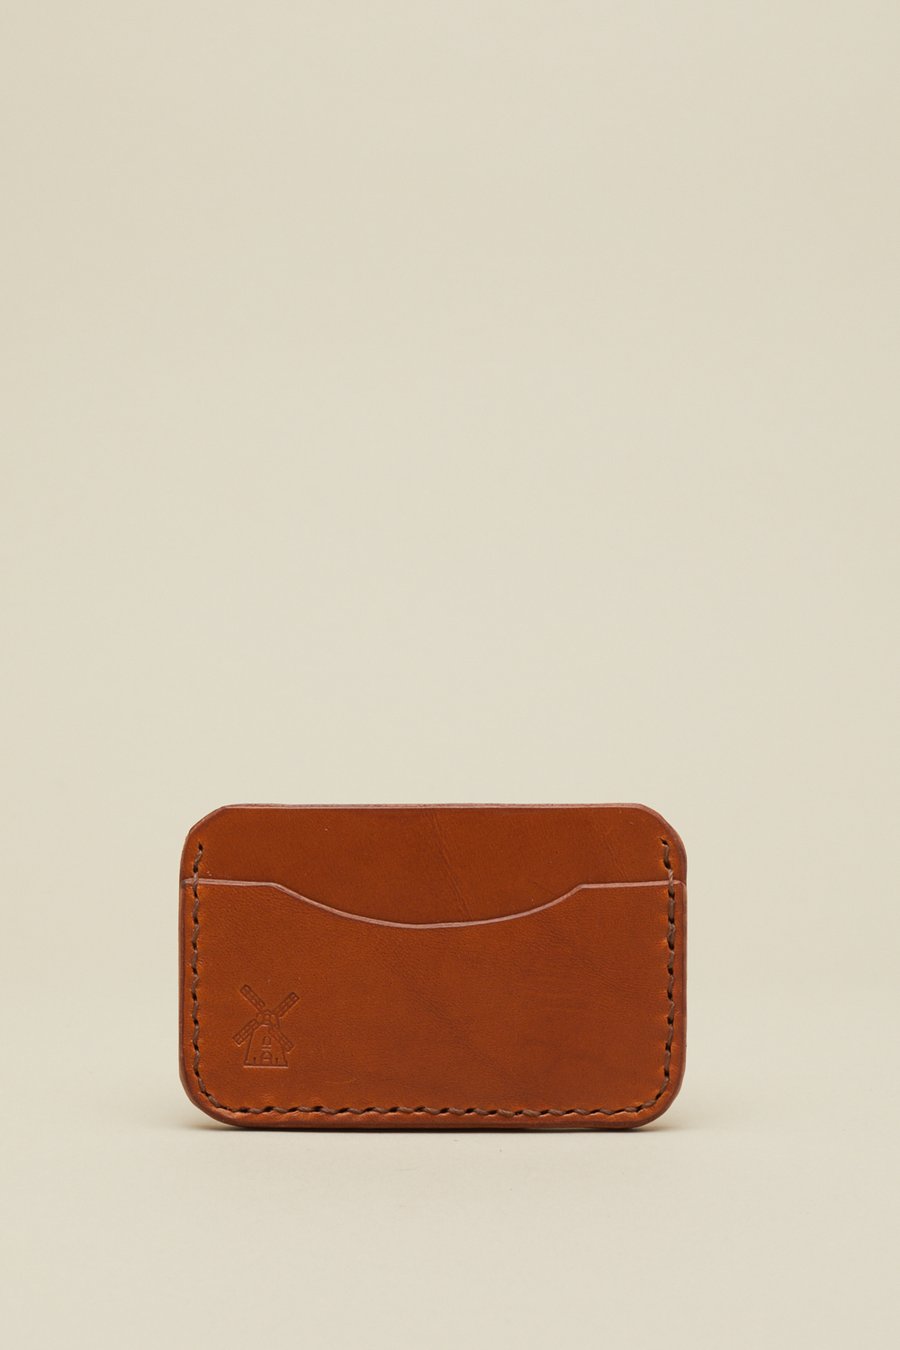 Image of Card Holder in Tan